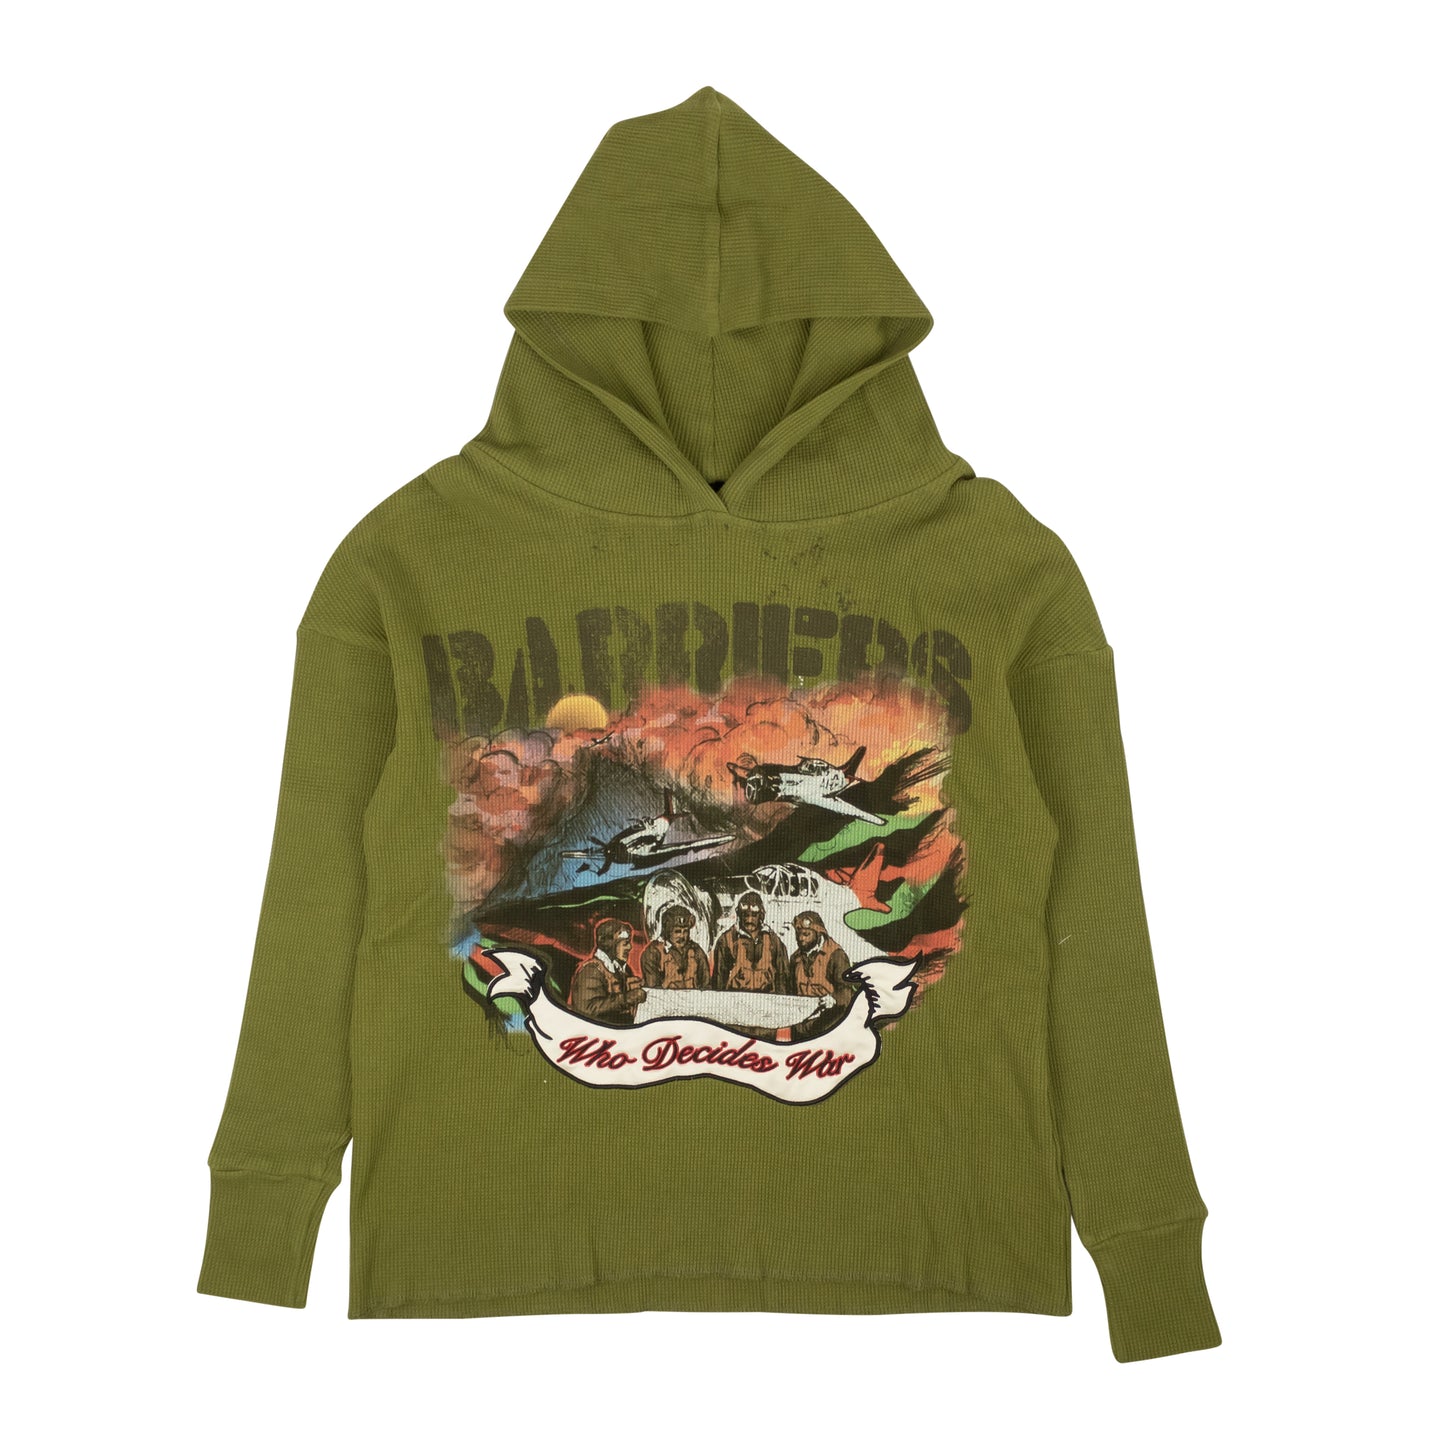 Who Decides War X Barriers Ny Tuskegee Pullover - Olive